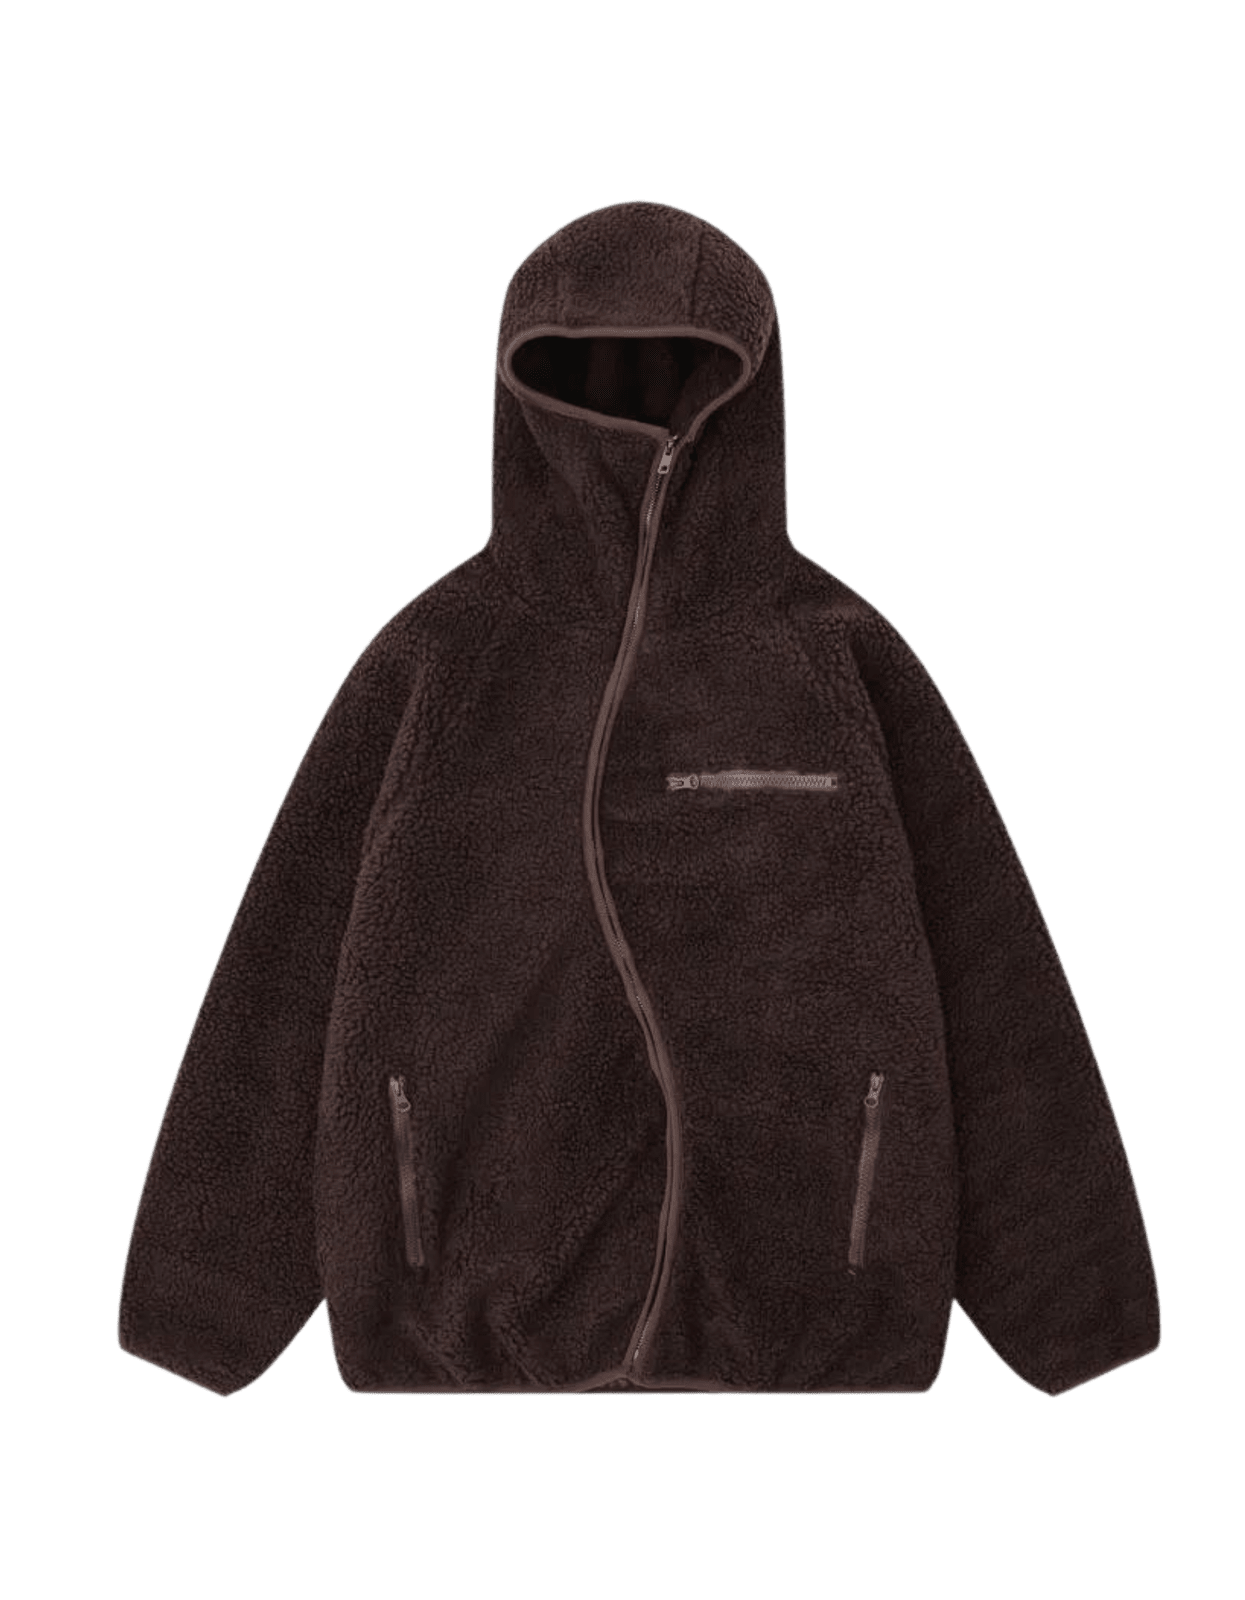 Cozy Comfort Sherpa Hoodie: Classic Warmth Meets Modern Style